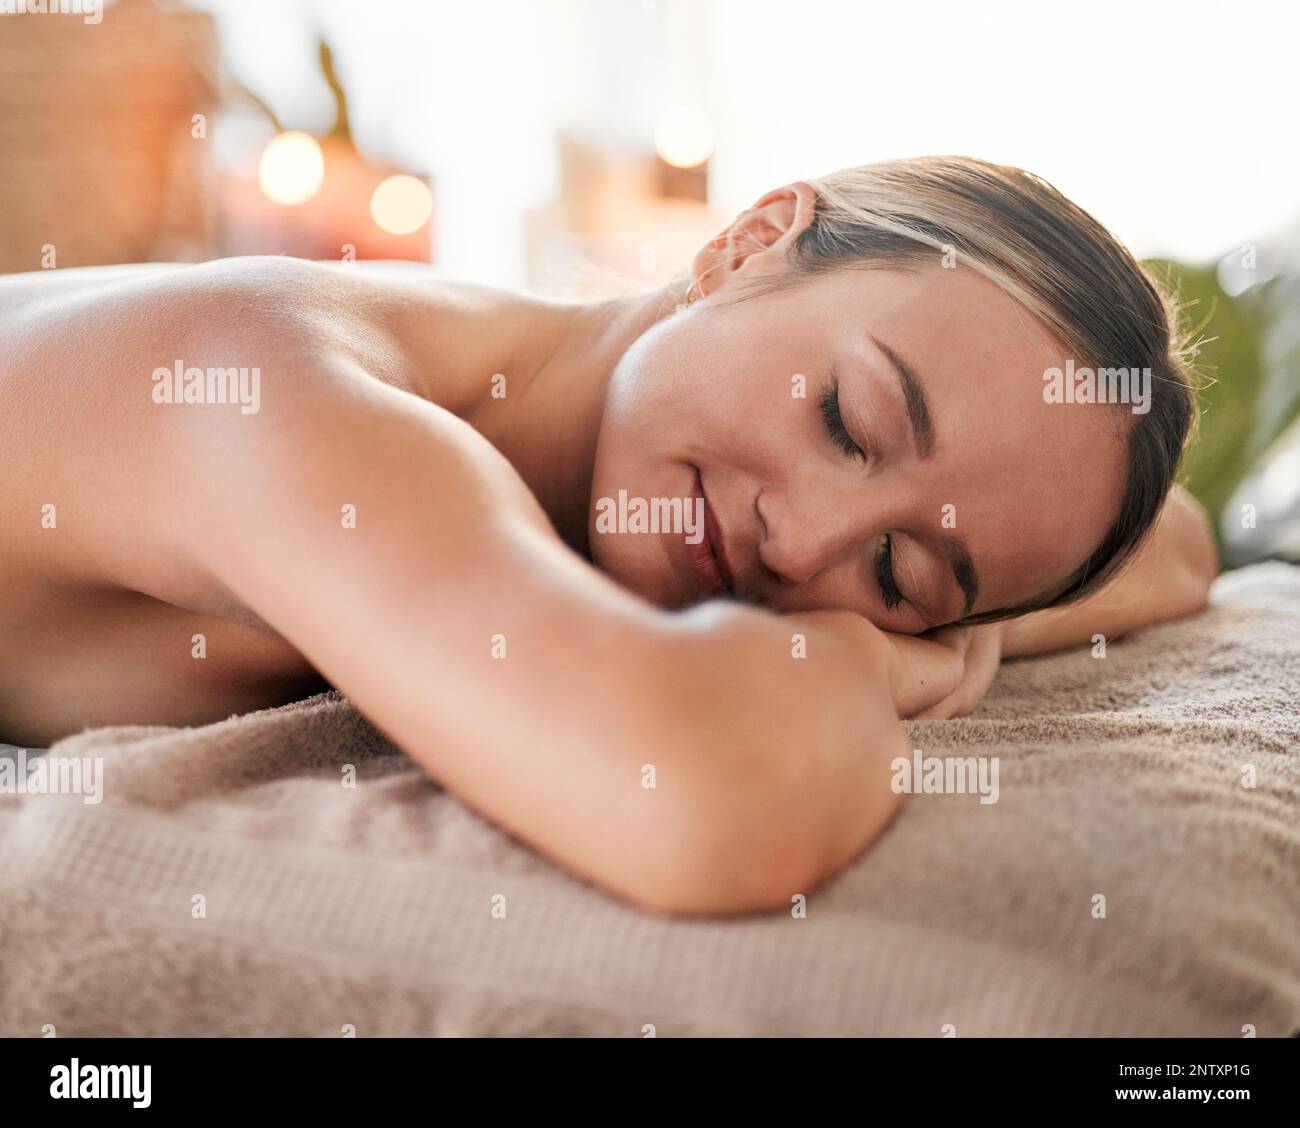 Relax, spa and sleeping woman in massage bed for wellness, peace and luxury pic